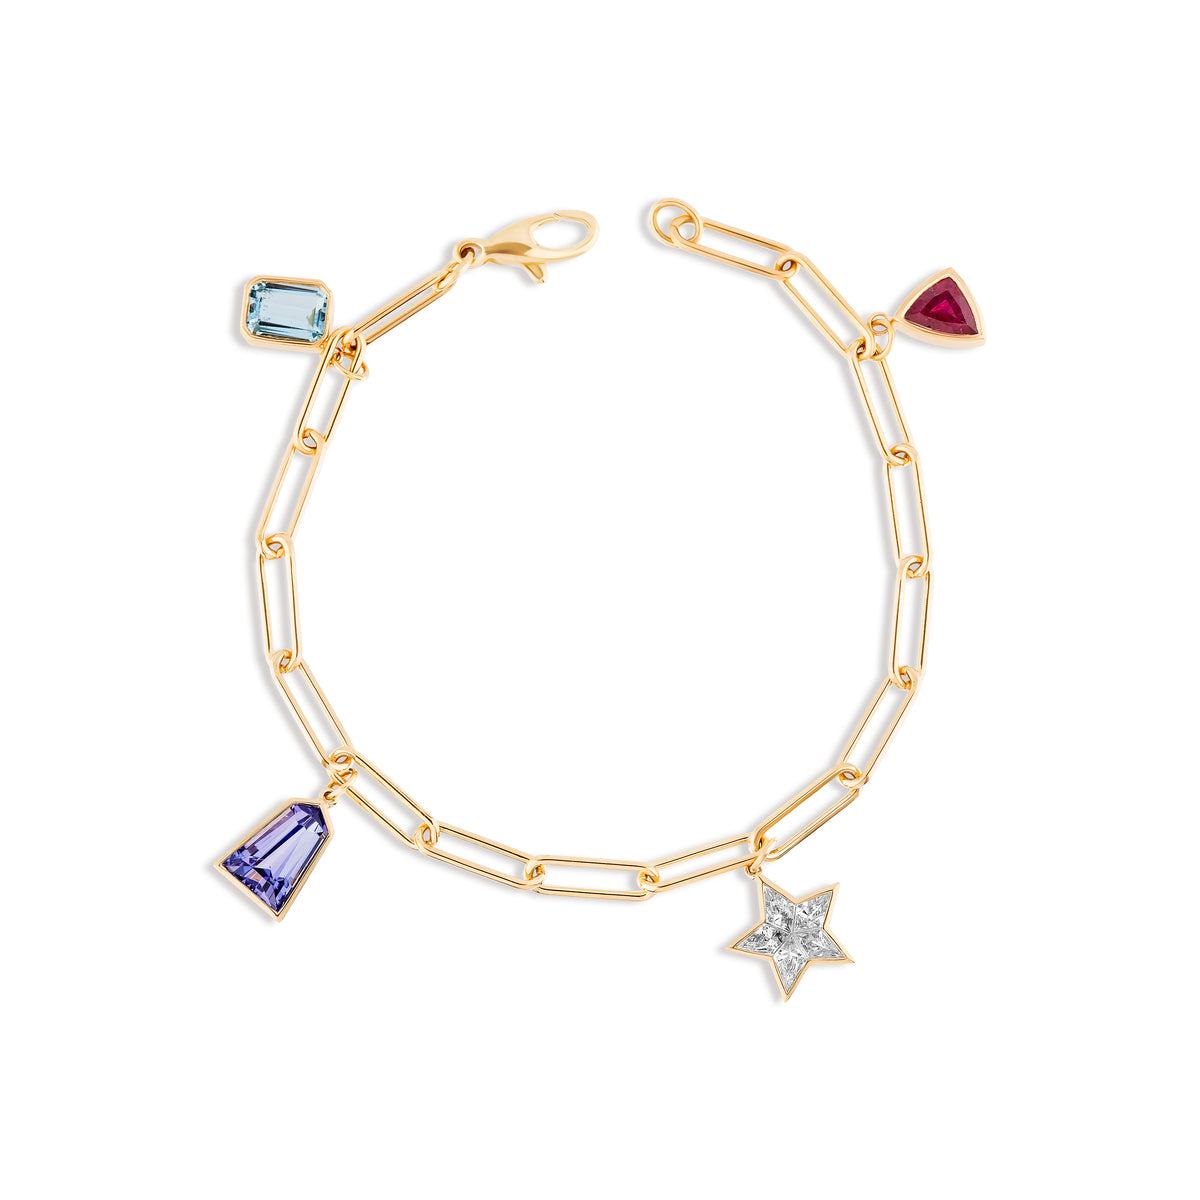 Mixed Shape Diamond and Sapphire Charm Bracelet in Yellow Gold